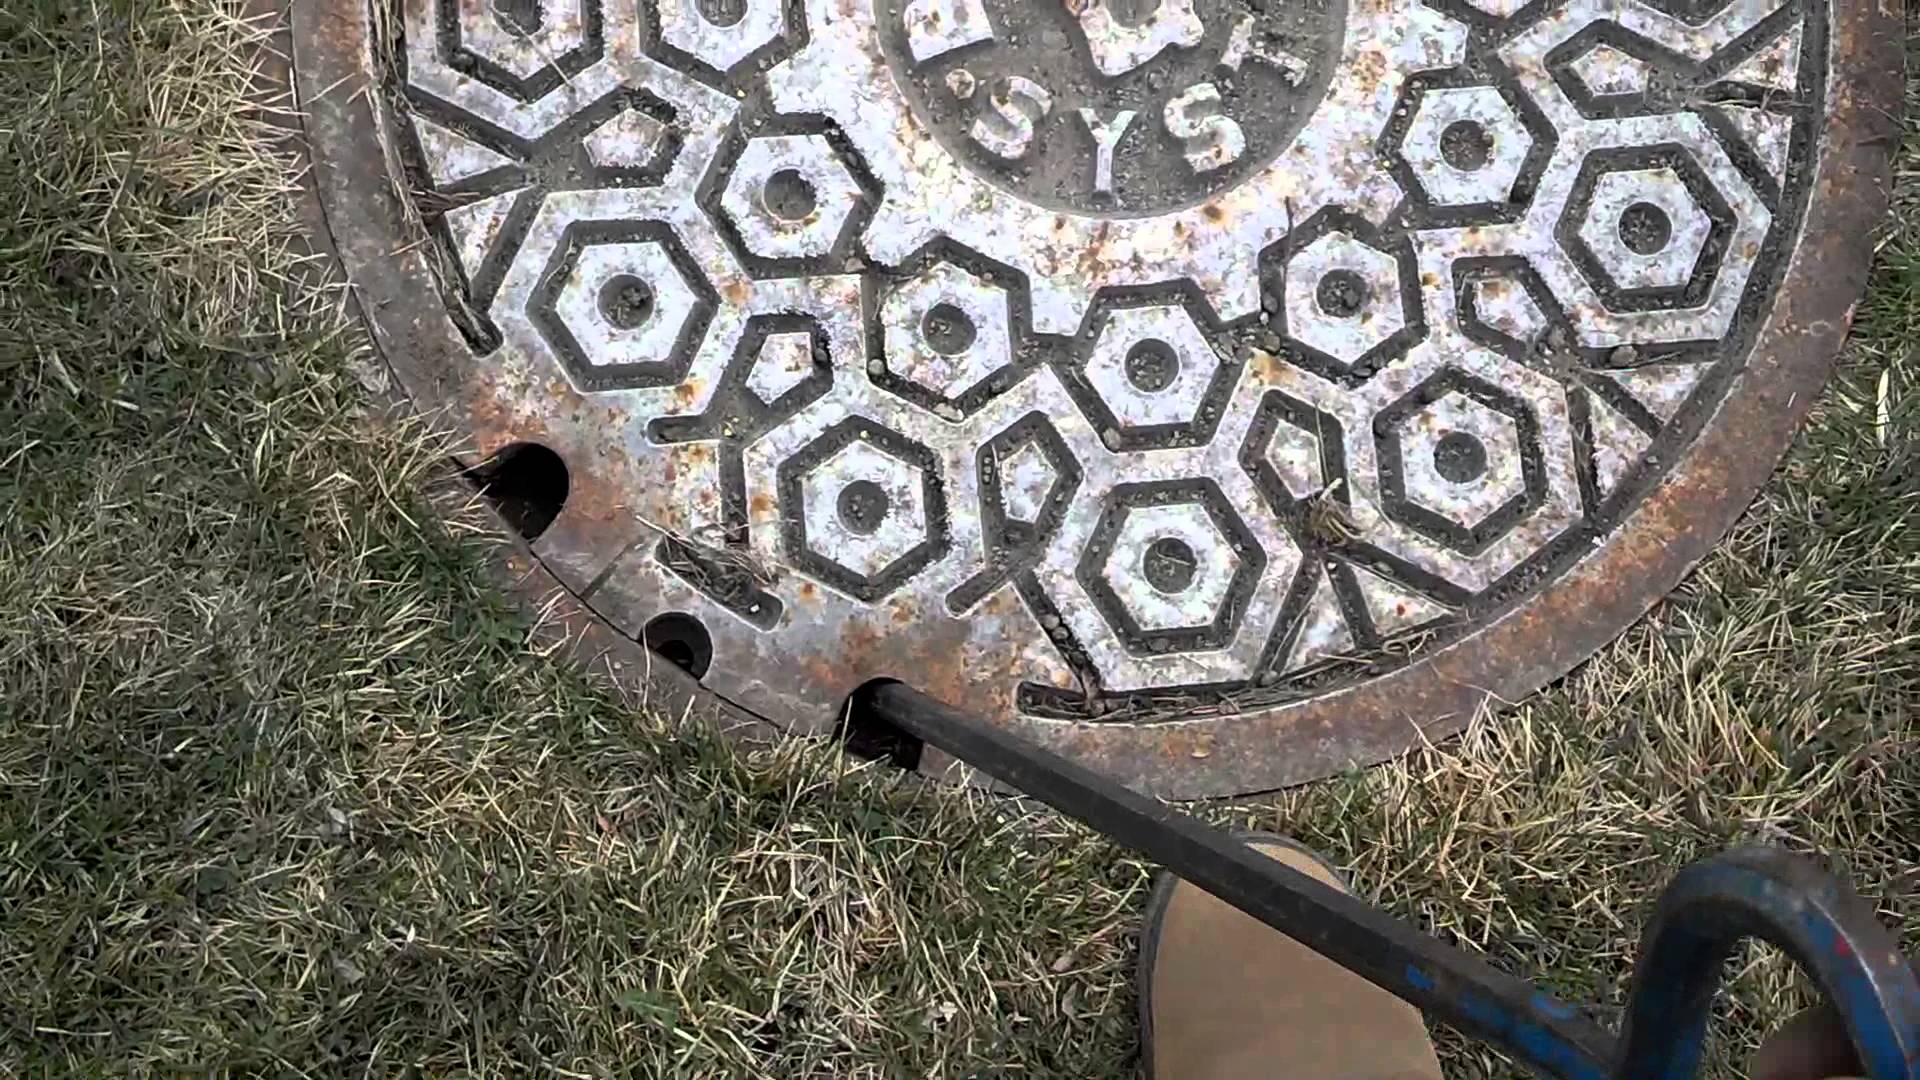 How to properly open and close a manhole - YouTube